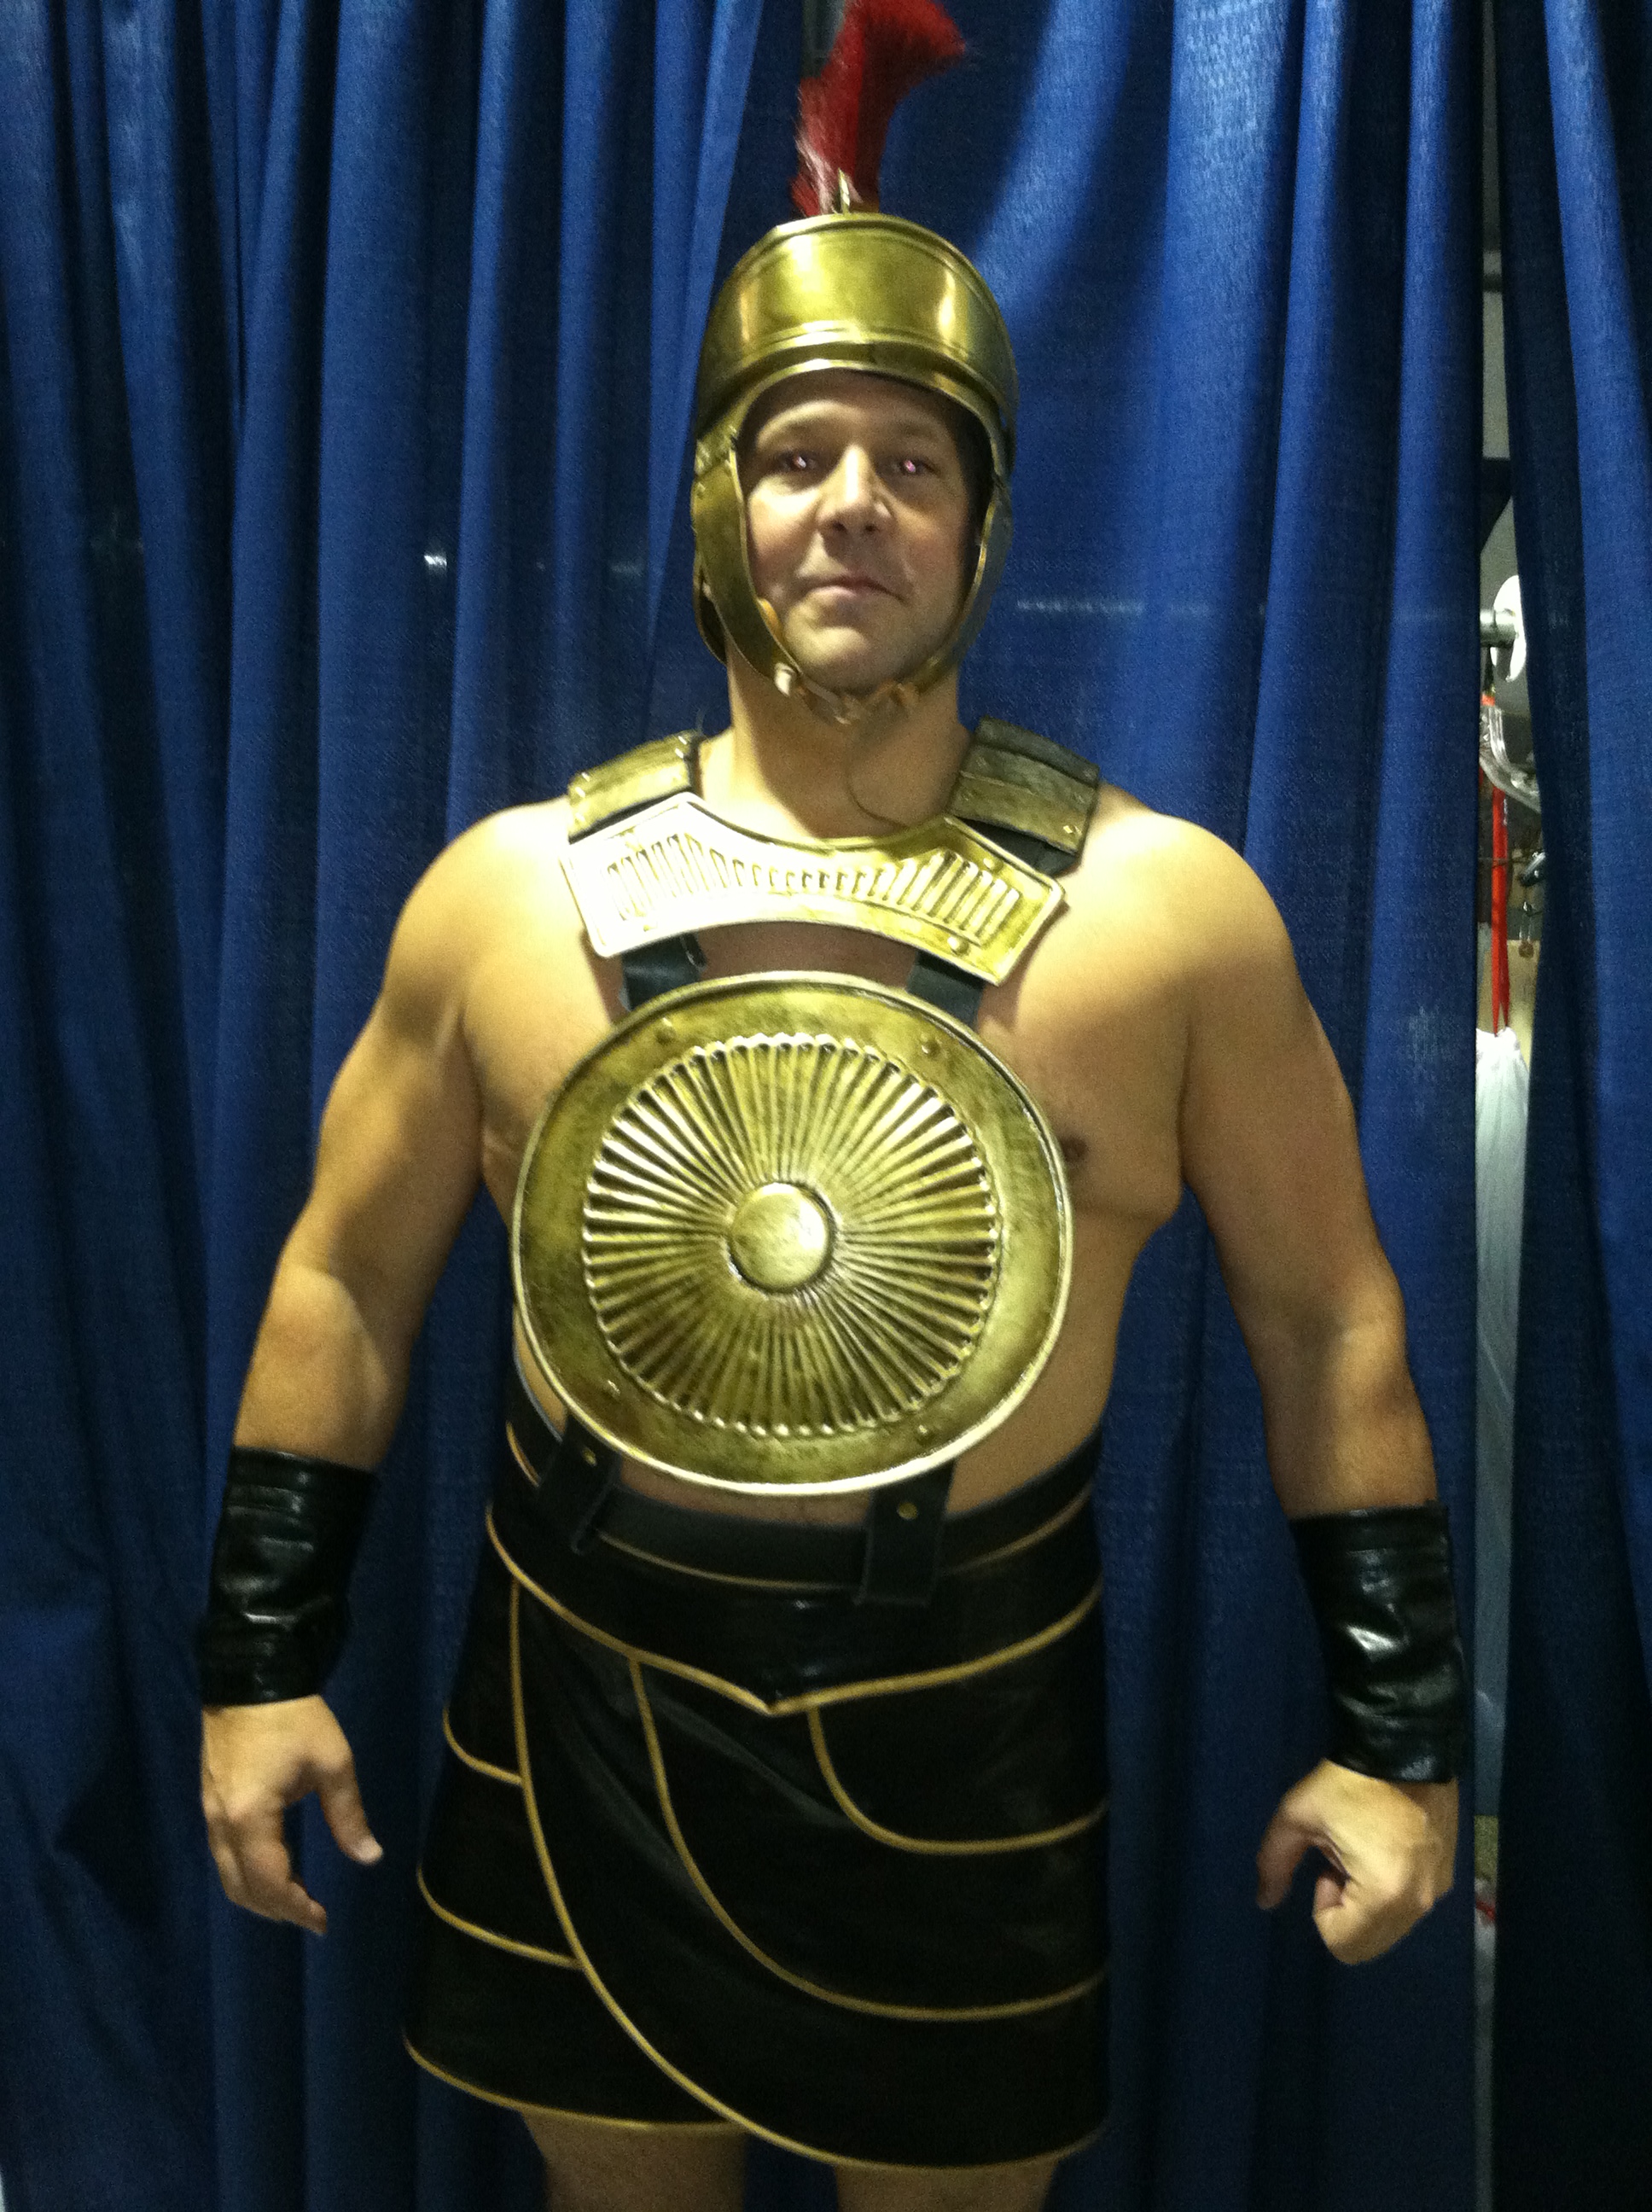 Kelly S Frank as a Gladiator for SuperBowl Halftime Show